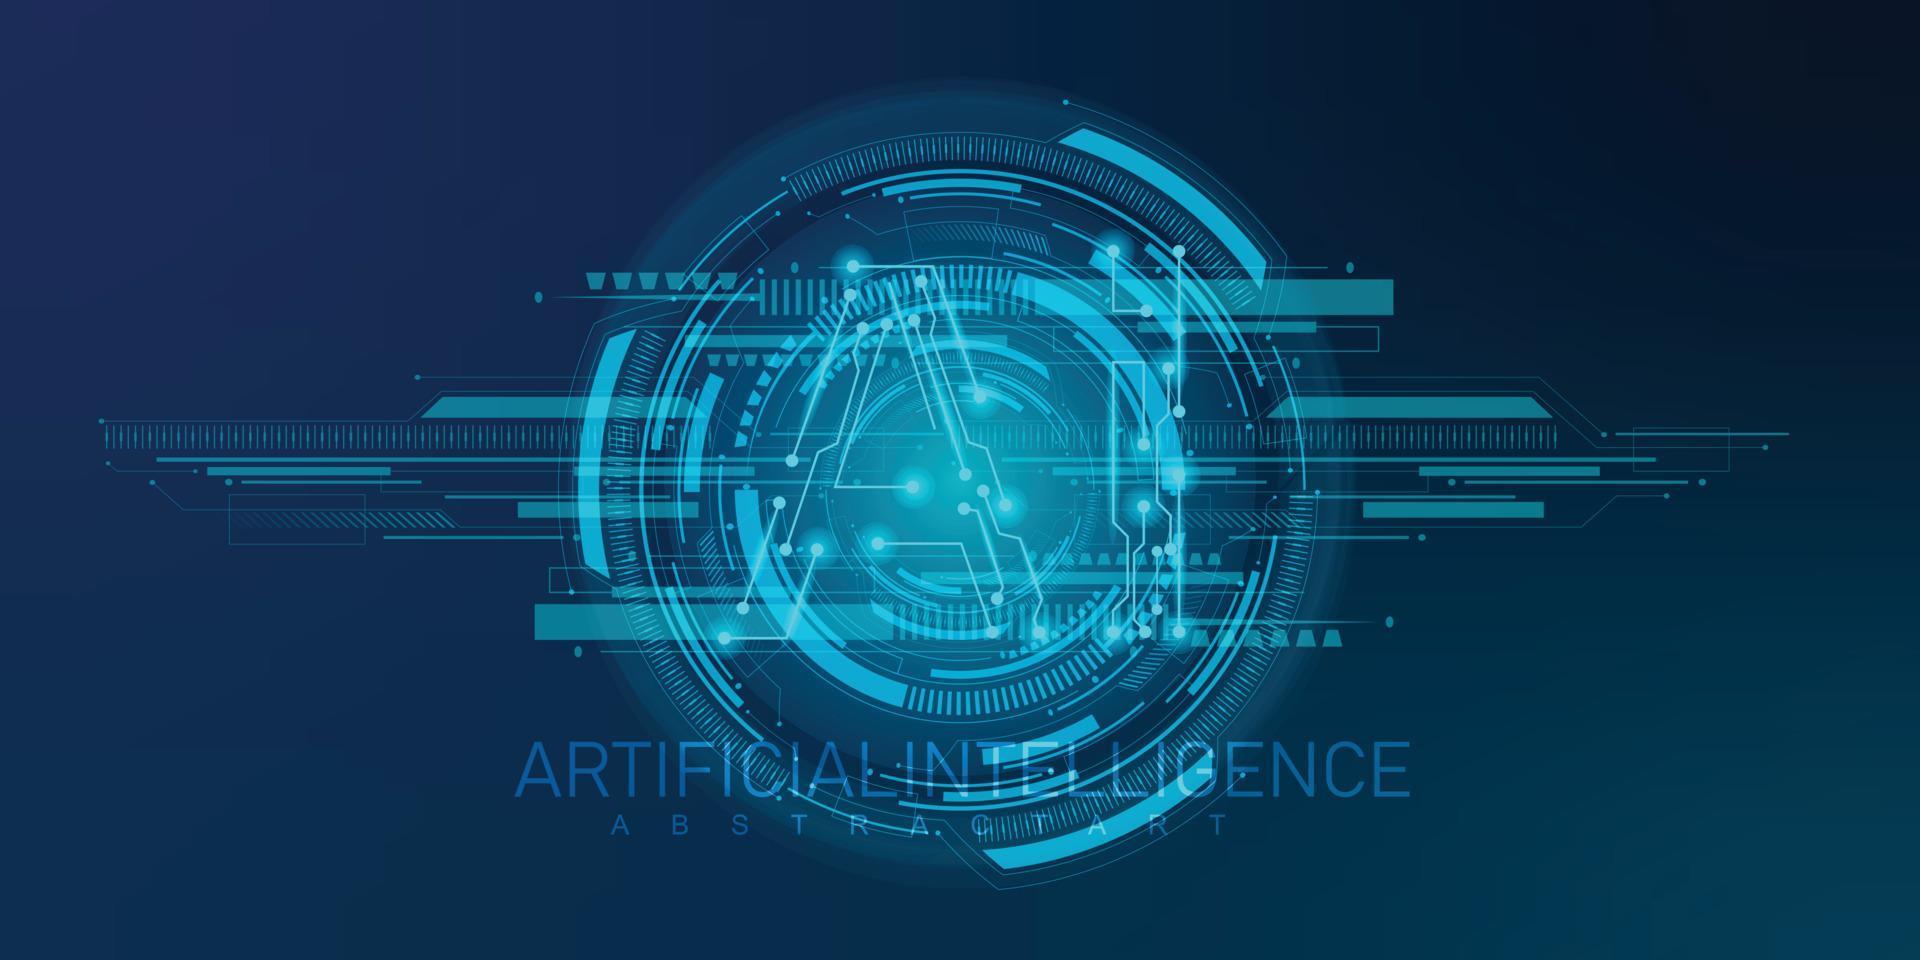 Artificial Intelligence Logo, Icon. Vector symbol AI, deep learning blockchain neural network concept. Machine learning, artificial intelligence, ai. Digital Data Security Technology Illustration.